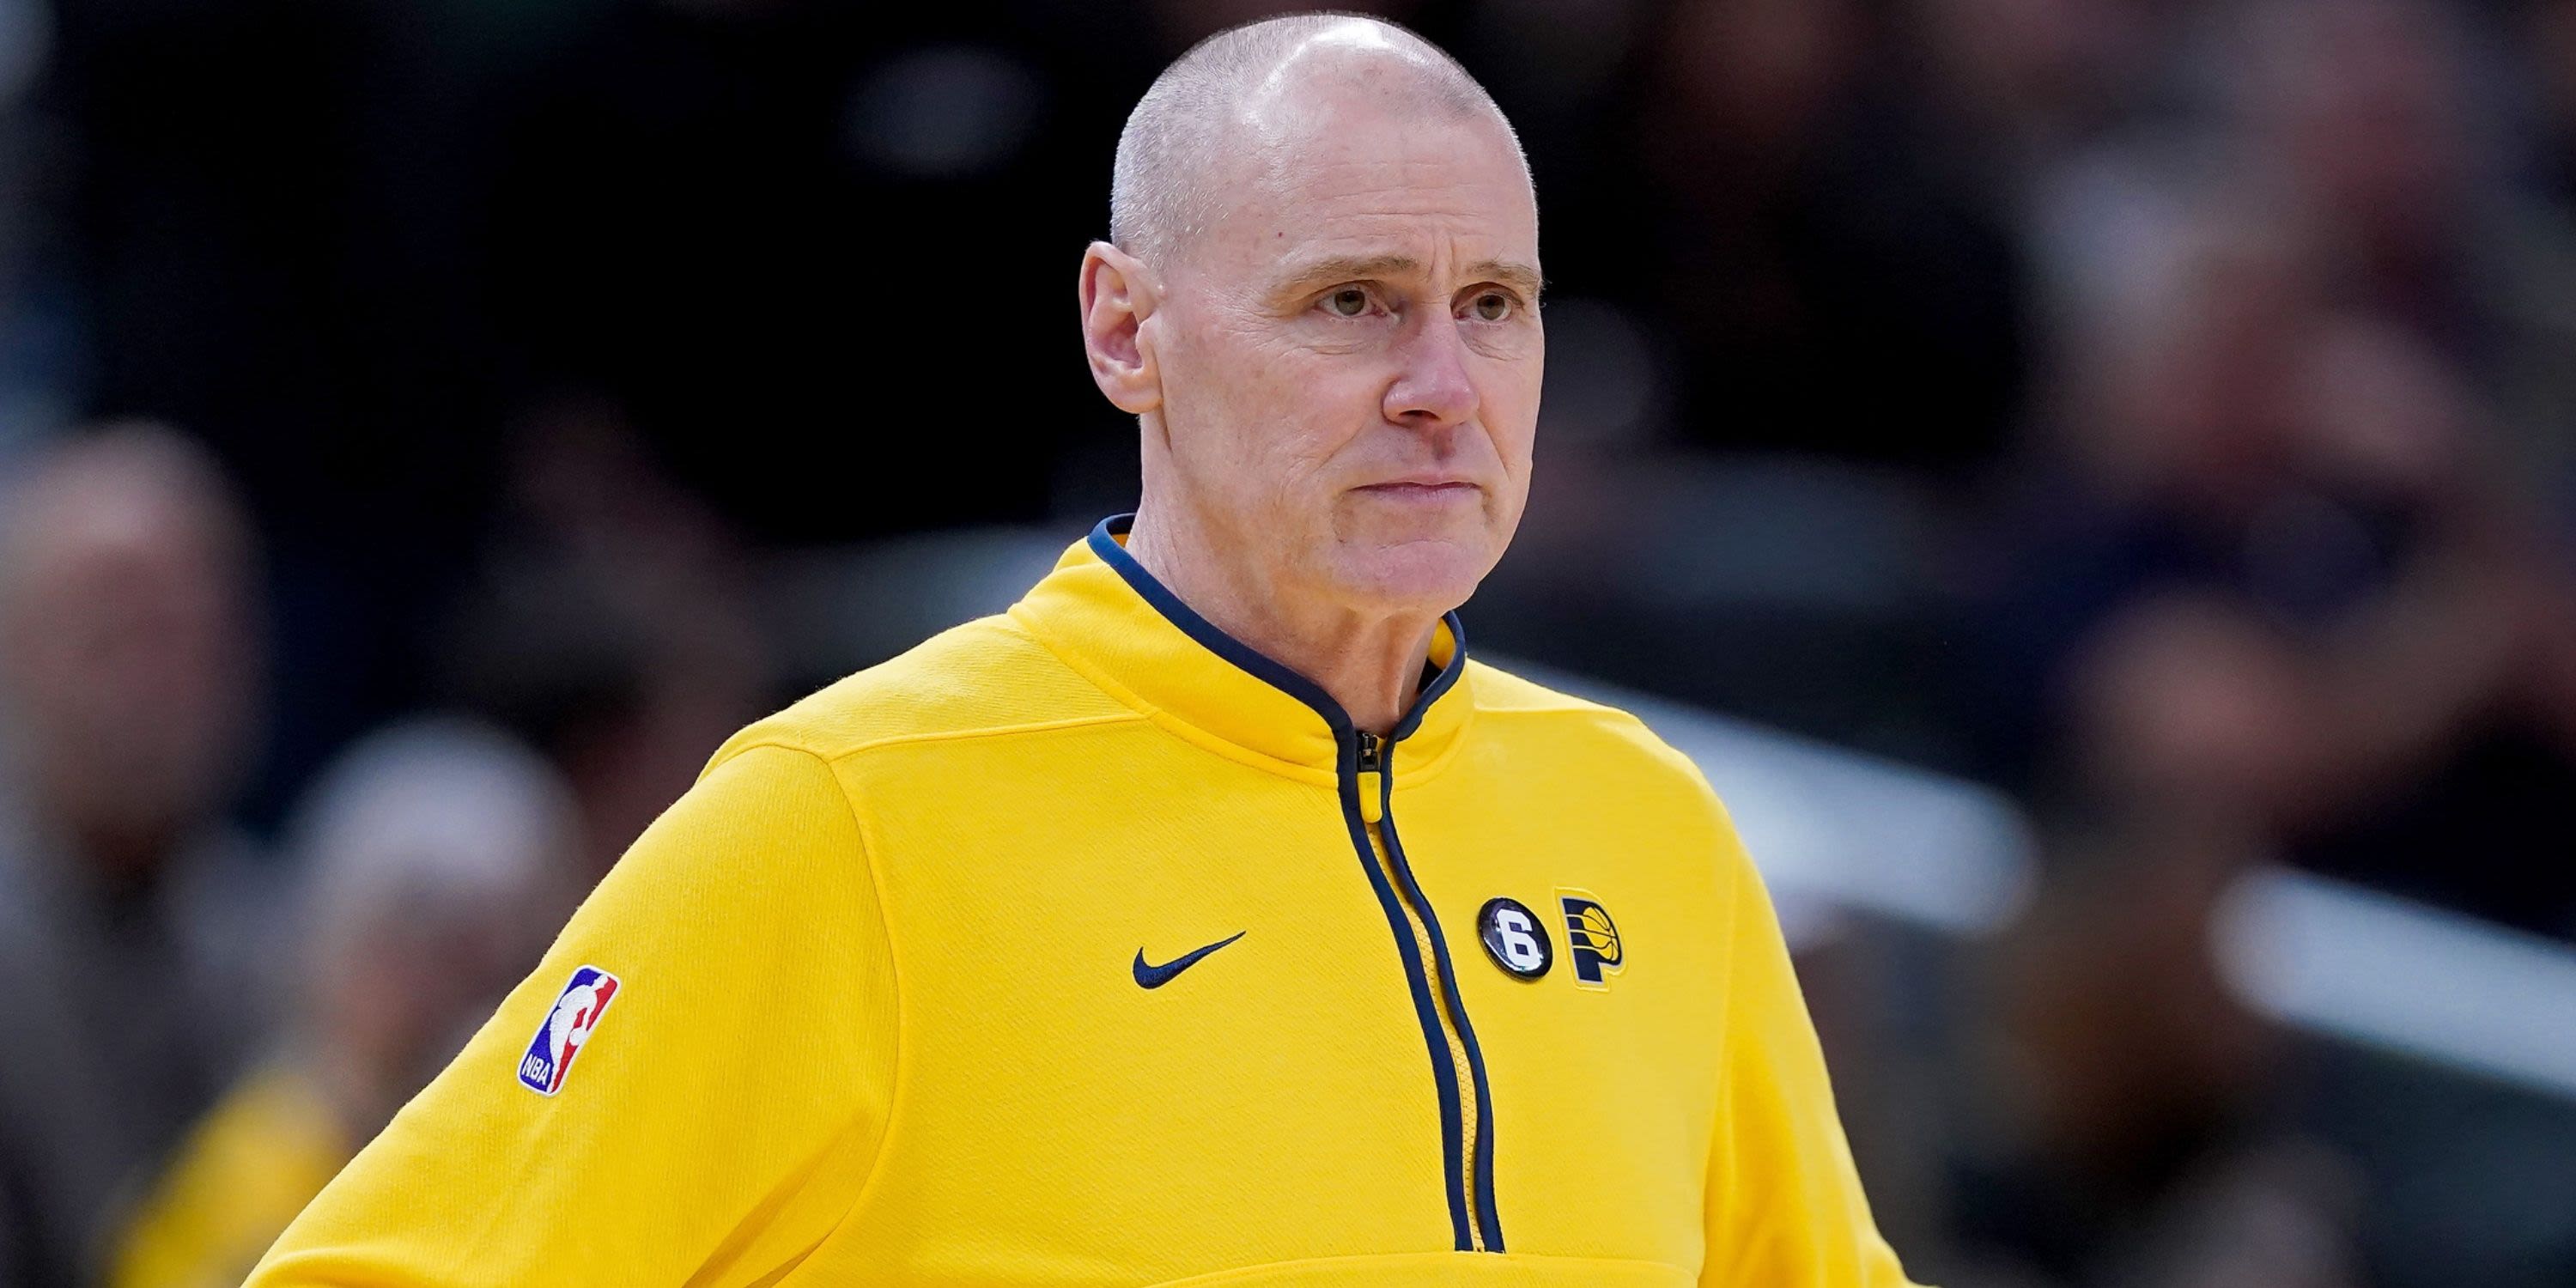 Pacers Submitted an Absurd Number of Missed Calls to NBA Office